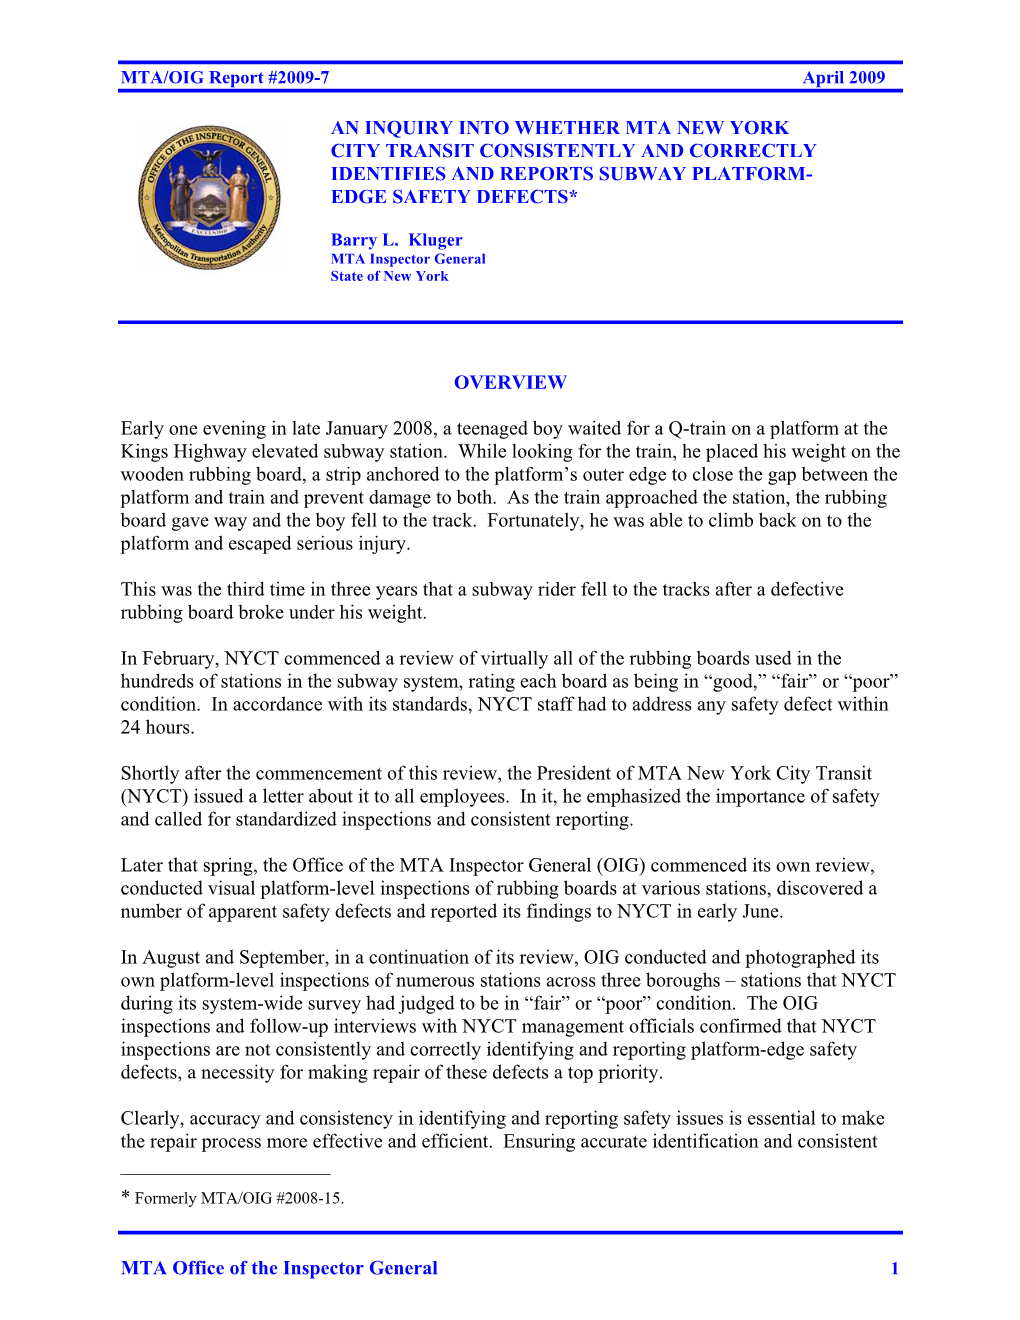 MTA Office of the Inspector General an INQUIRY INTO WHETHER MTA